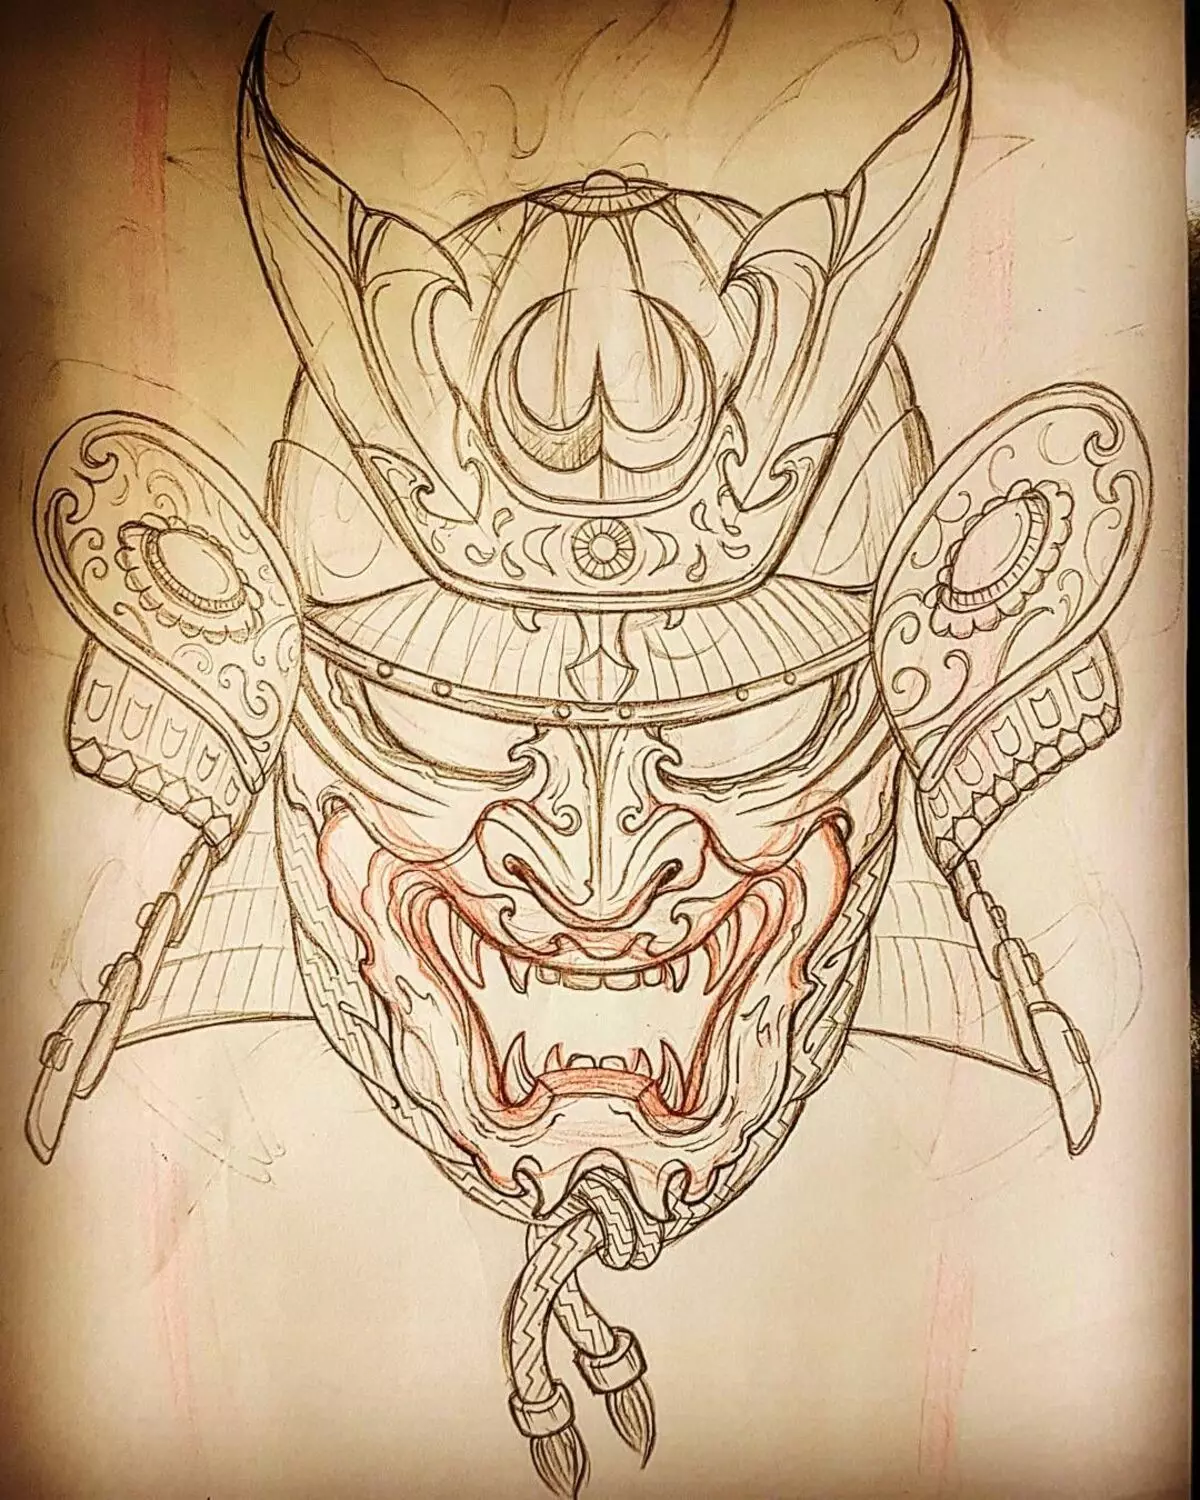 Tattoo in the form of Japanese masks: demons and their meanings. Sketches of tattoos in the style of Japan masks. Tattoo 